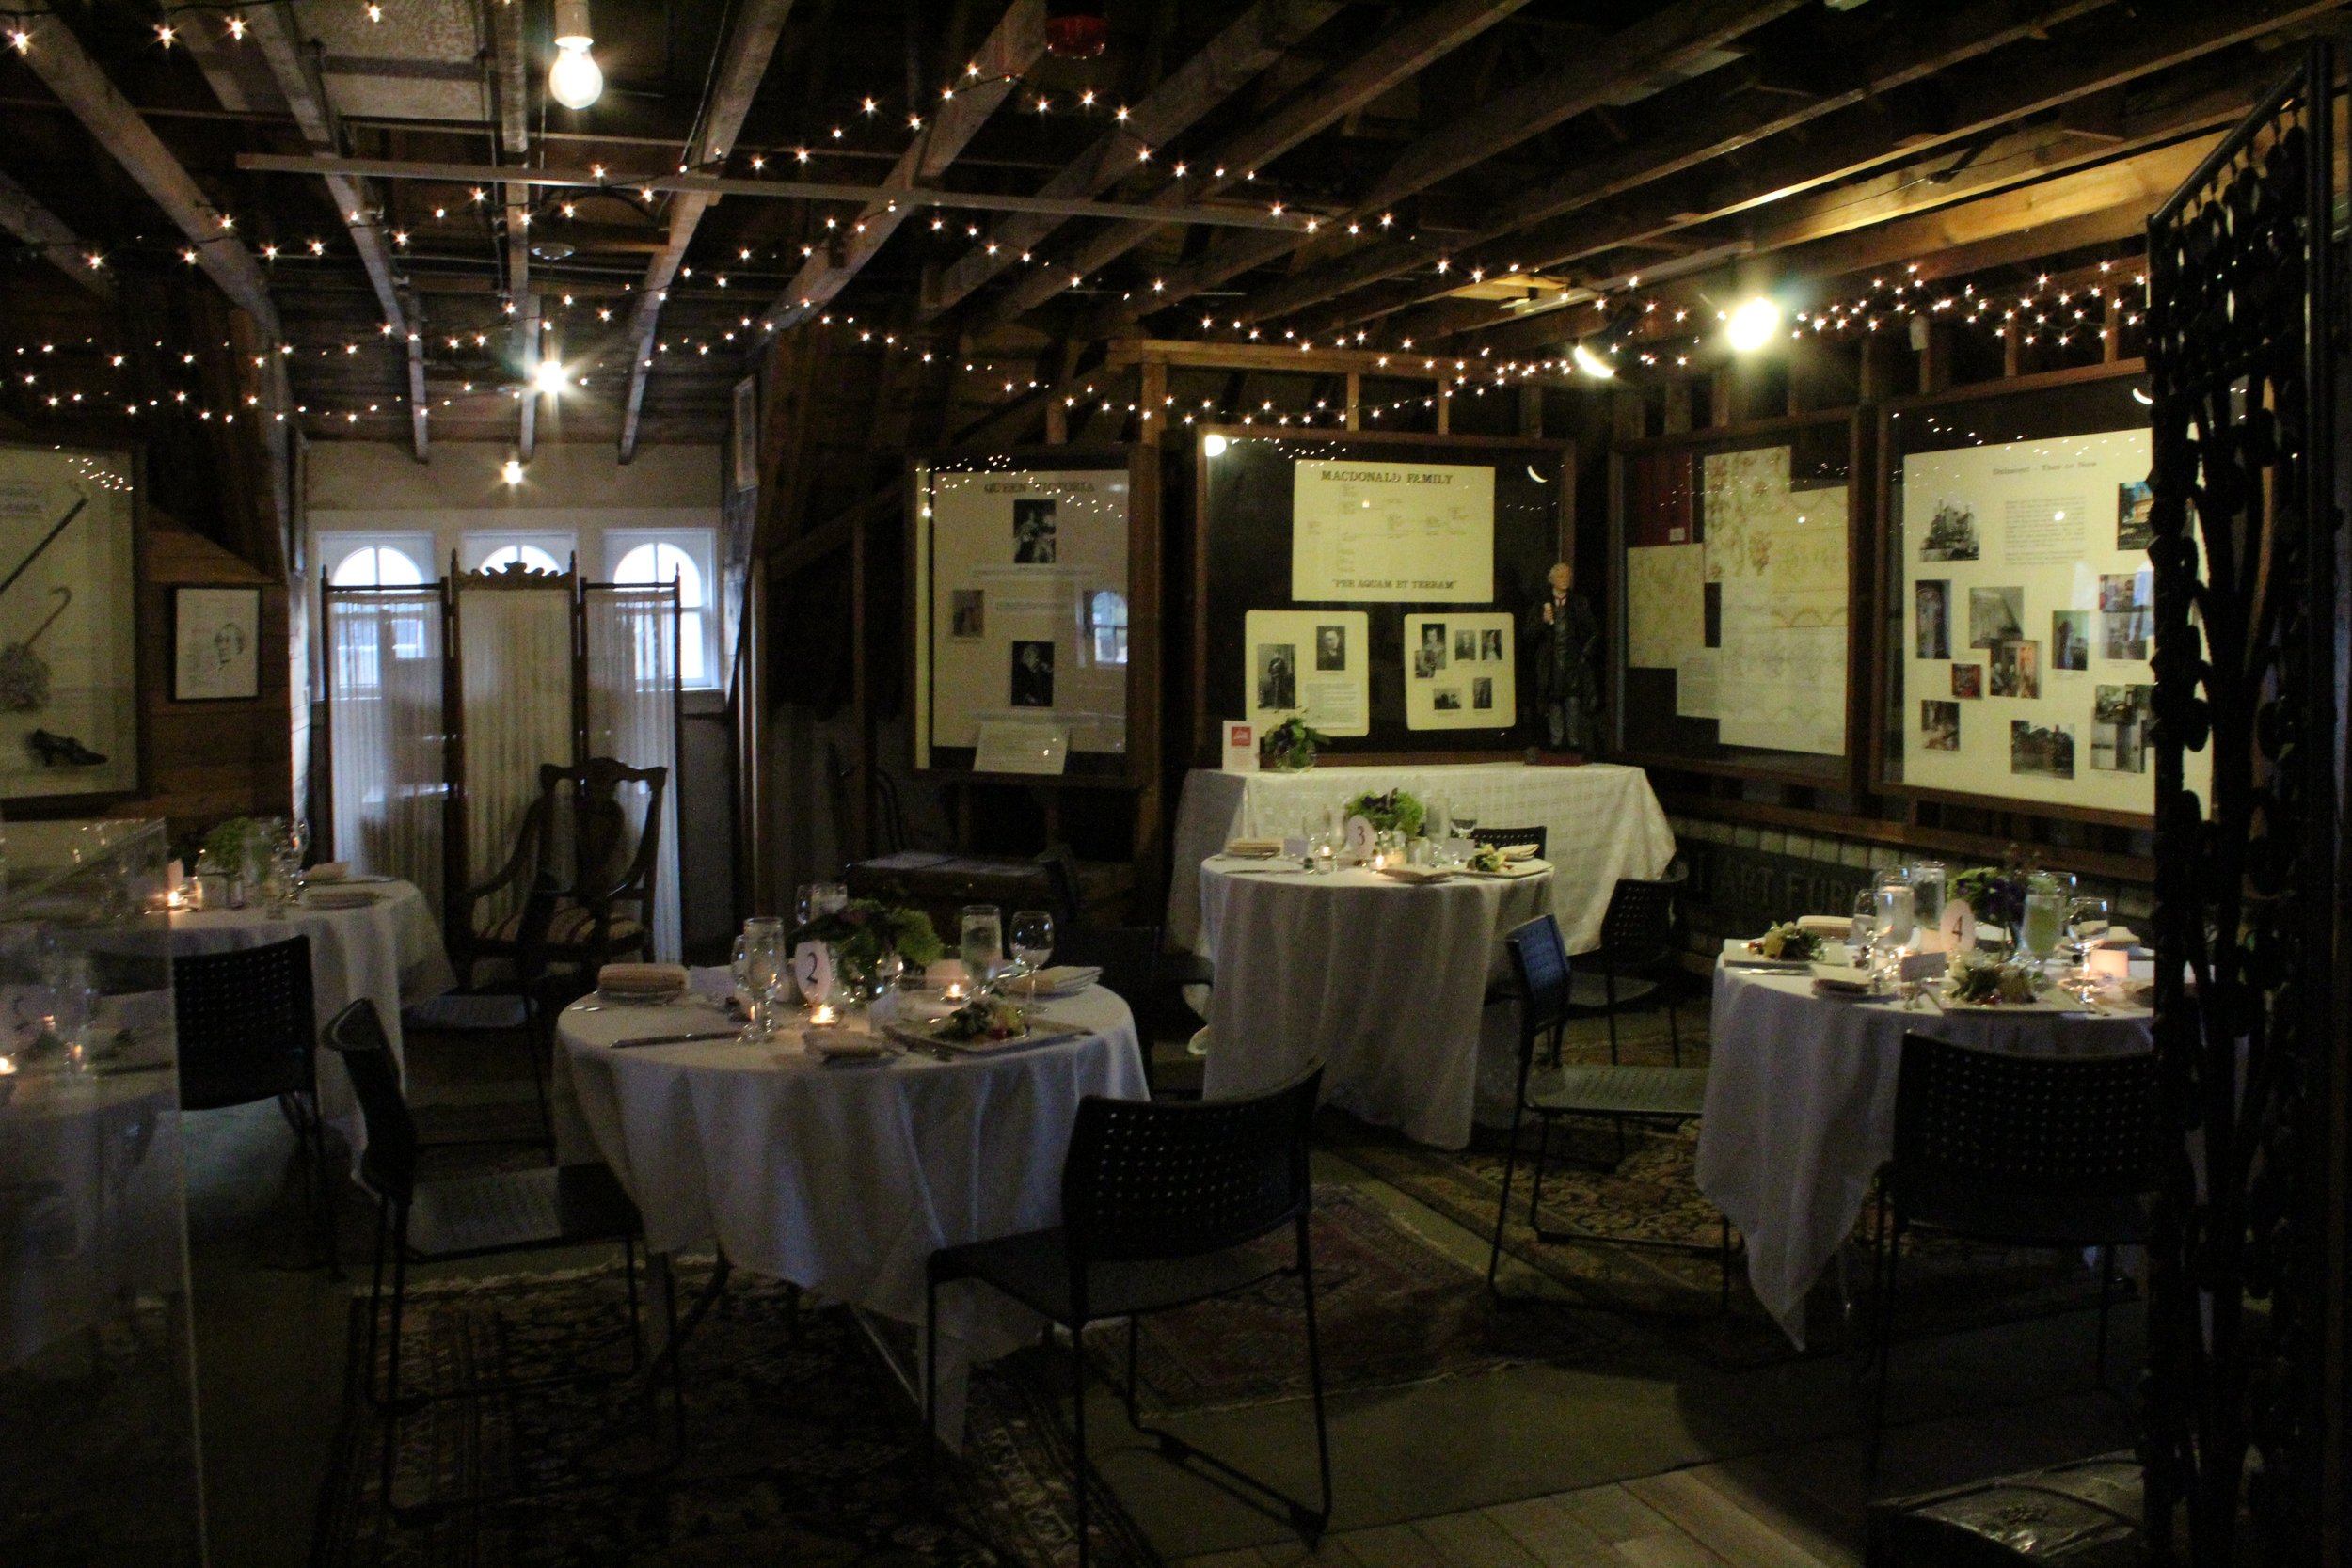  Dalnavert’s attic with several small tables set for a fancy dinner with white table cloths and place settings 